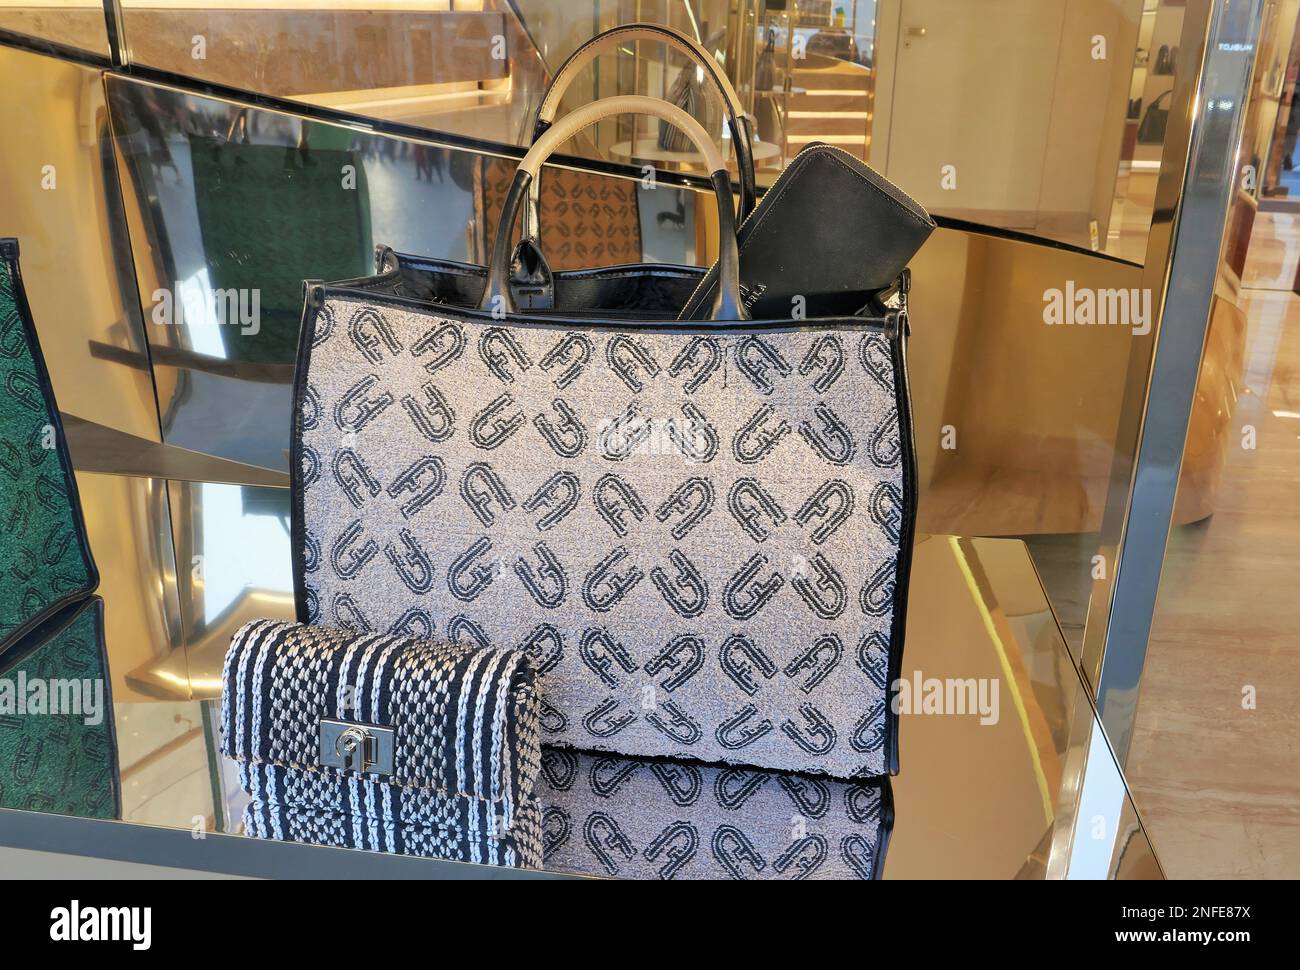 BAGS FOR WOMEN ON DISPLAY AT FURLA FASHION BOUTIQUE Stock Photo